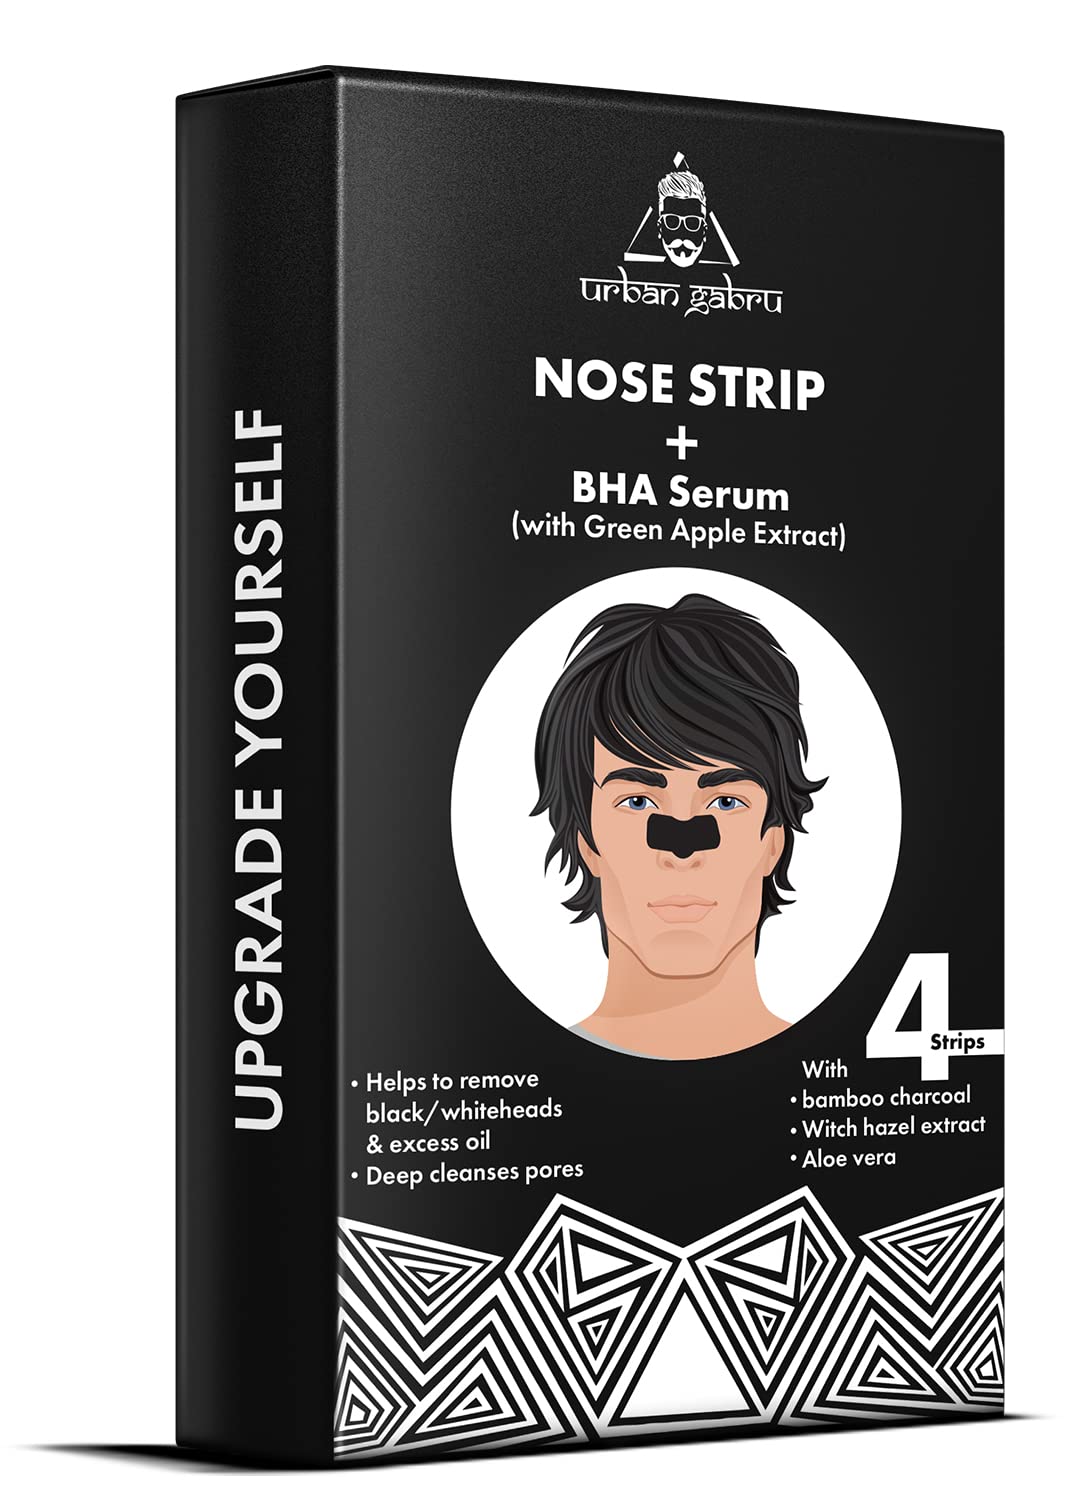 UrbanGabru Nose Strip with BHA Serum | Nose Strips for Blackhead, Whitehead Remover (4 Strips) | Pore Cleanser | with Natural Aloe Vera & Witch Hazel Extracts